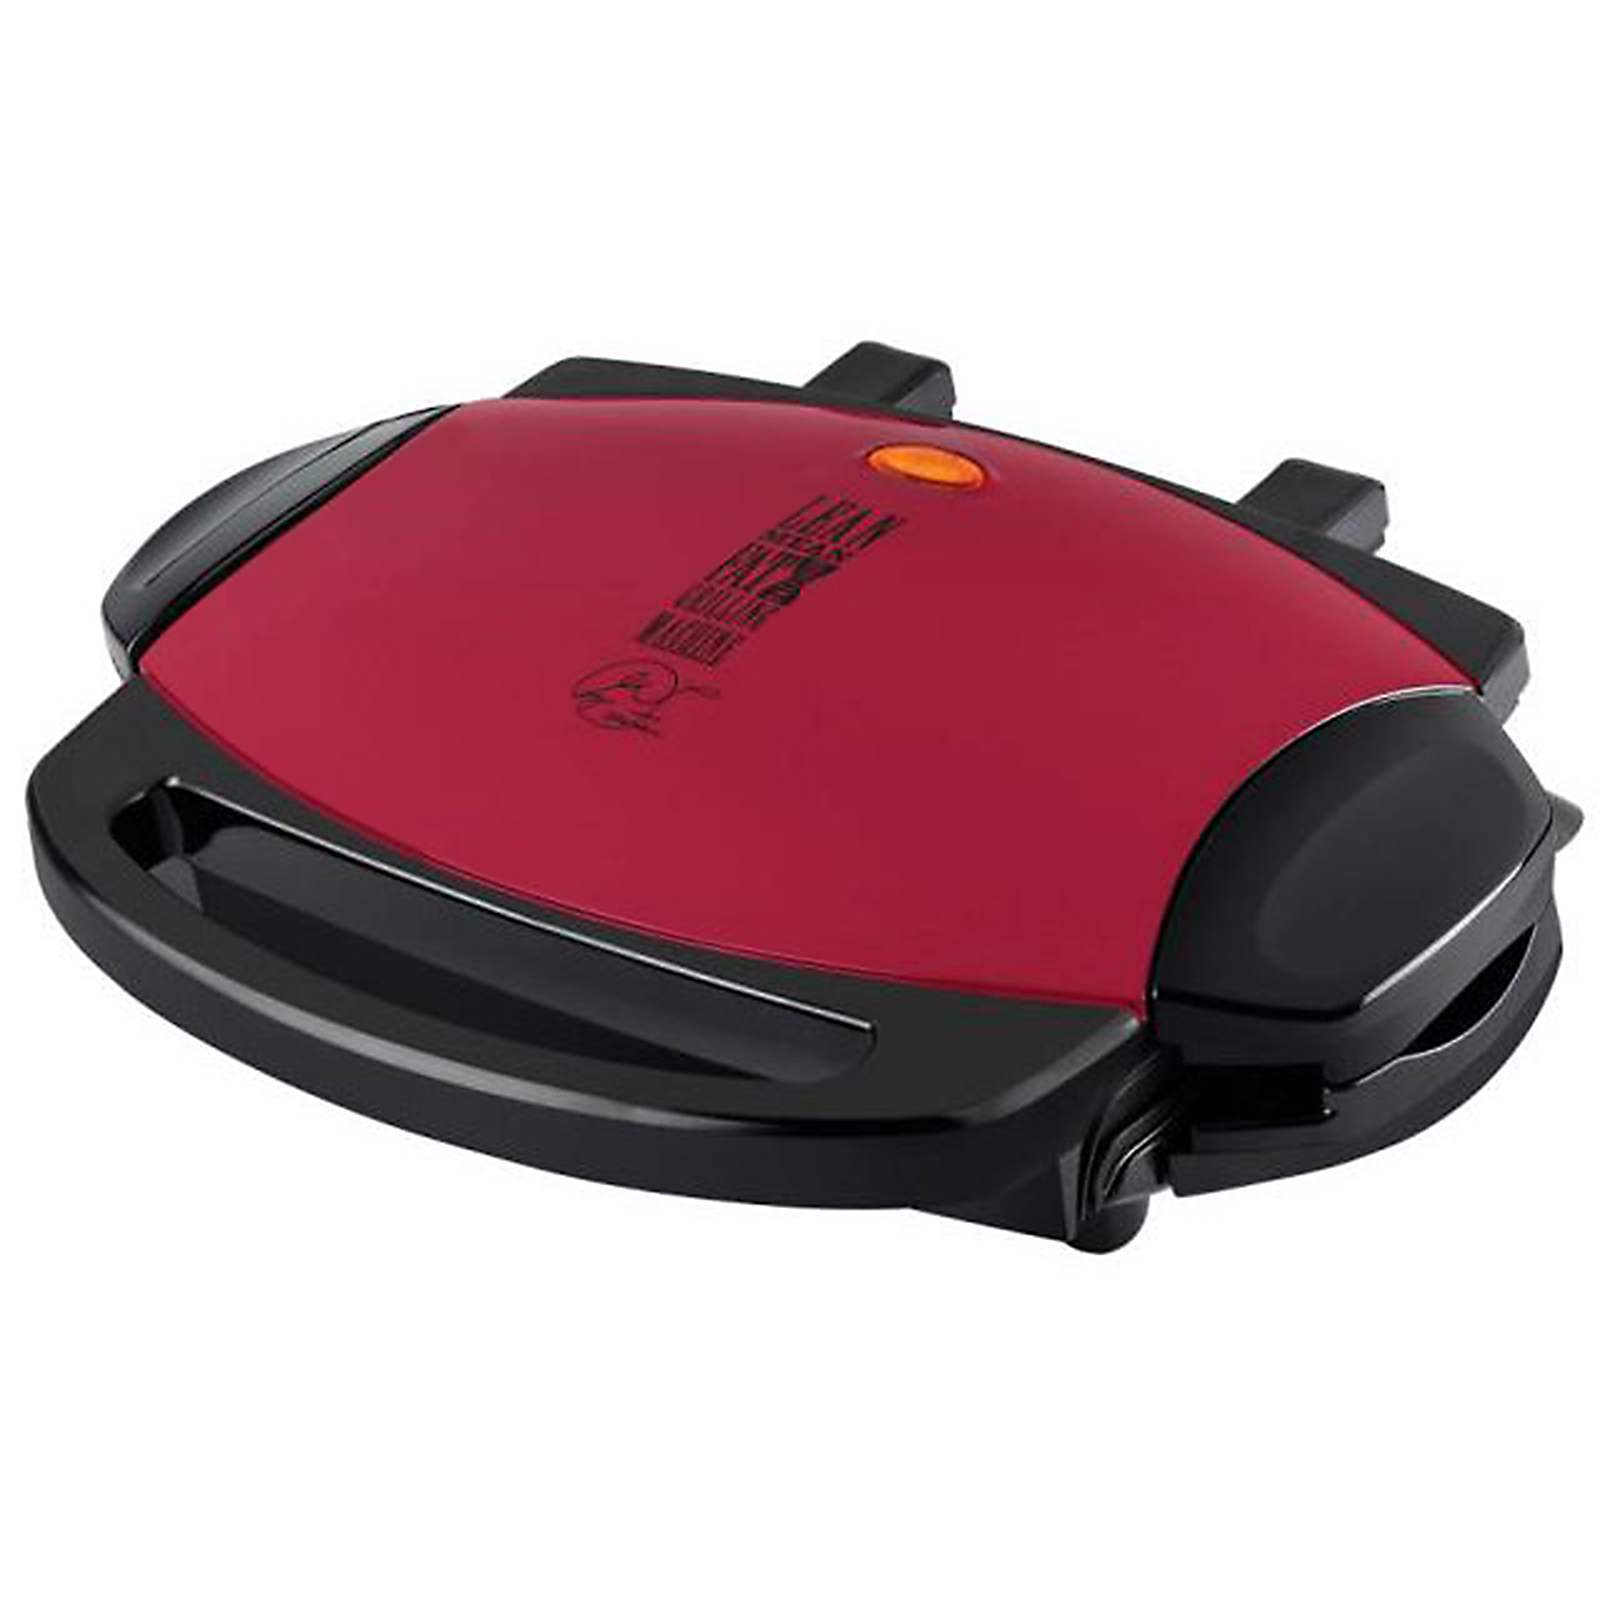 George Foreman GRP46R 72 sq. in. Grill - Red